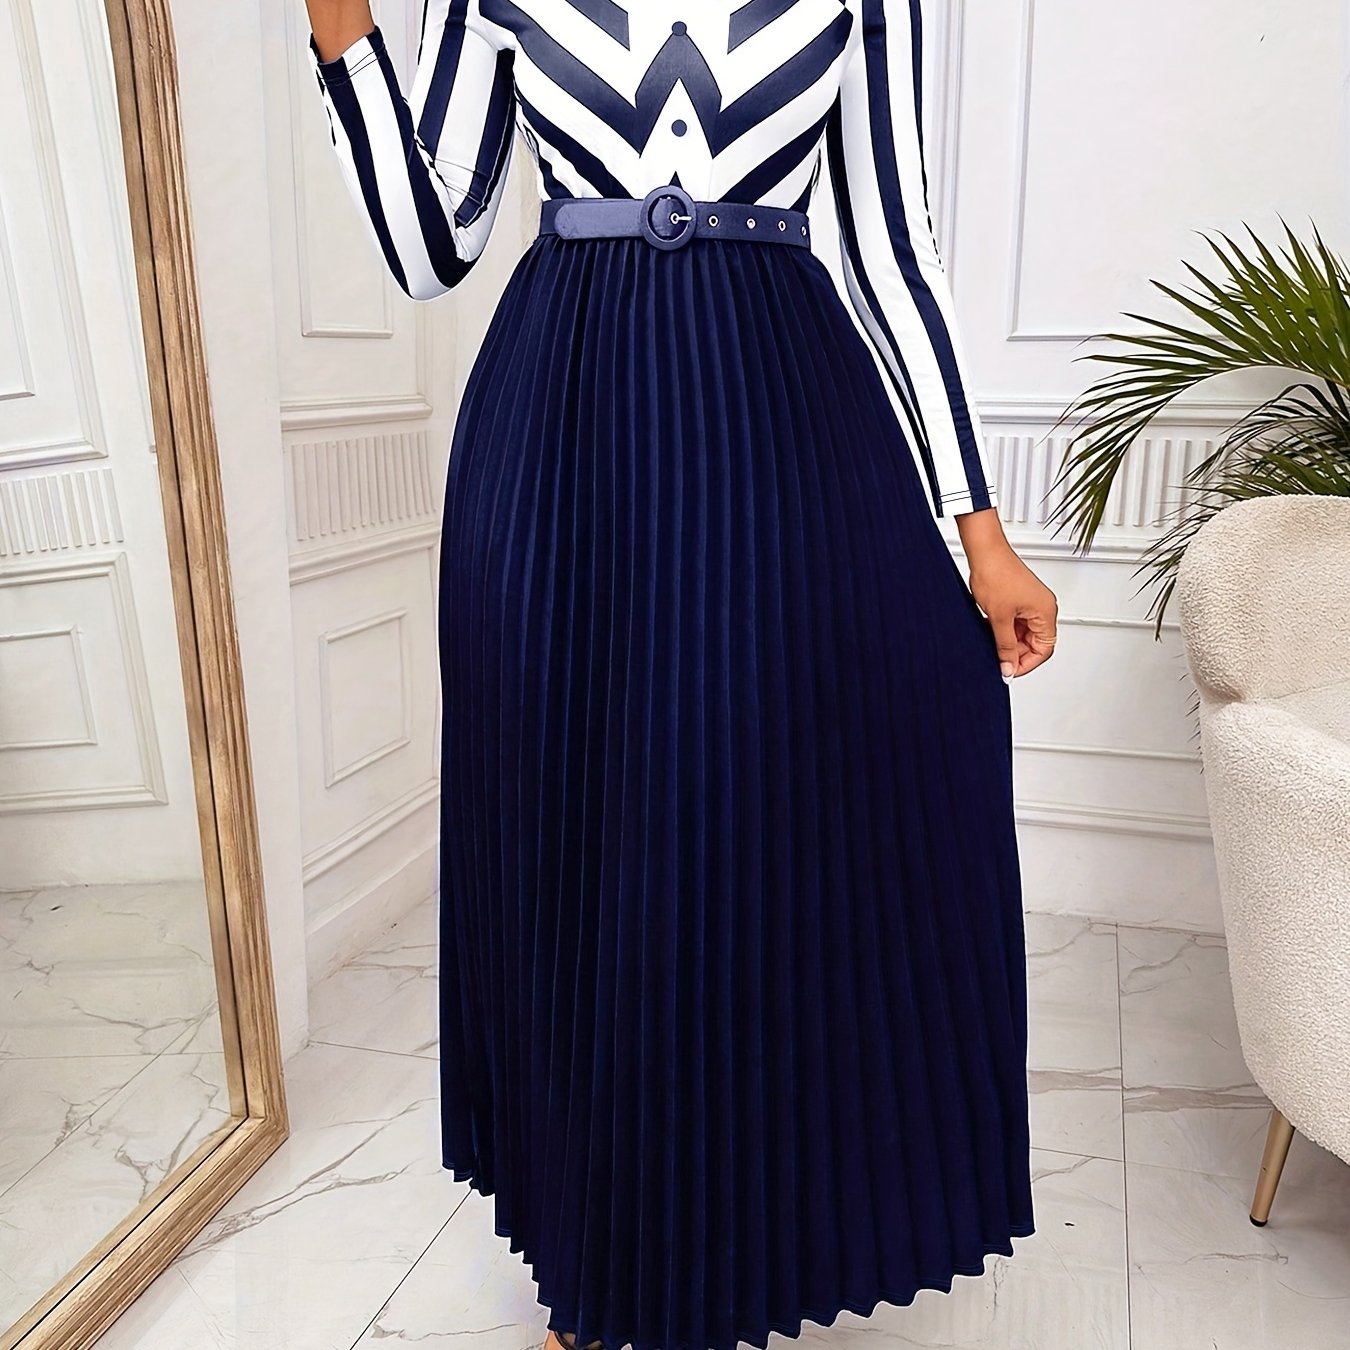 xieyinshe  Graphic Print Splicing Belted Dress, Elegant Pleated Long Sleeve Dress For Spring & Fall, Women's Clothing